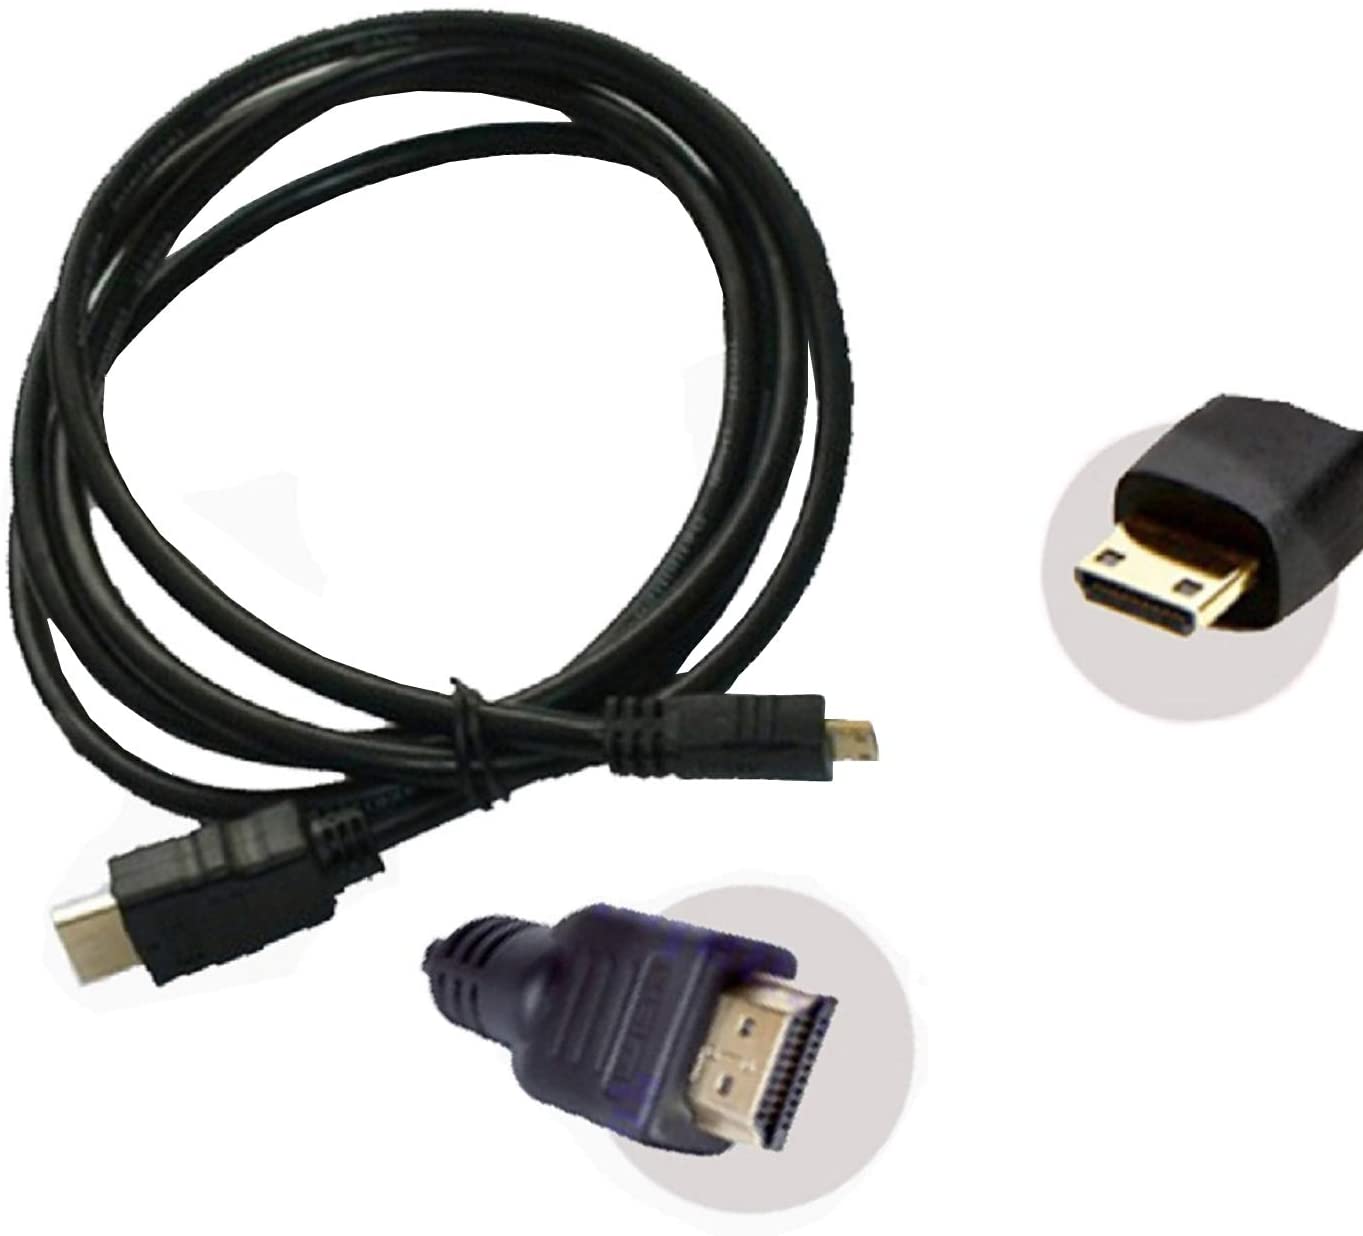 UPBRIGHT New Mini HDMI Cable Audio Video AV to HD TV HDTV Cord For Aluratek AT107F 7" WIFI Android Tablet PC - image 1 of 5